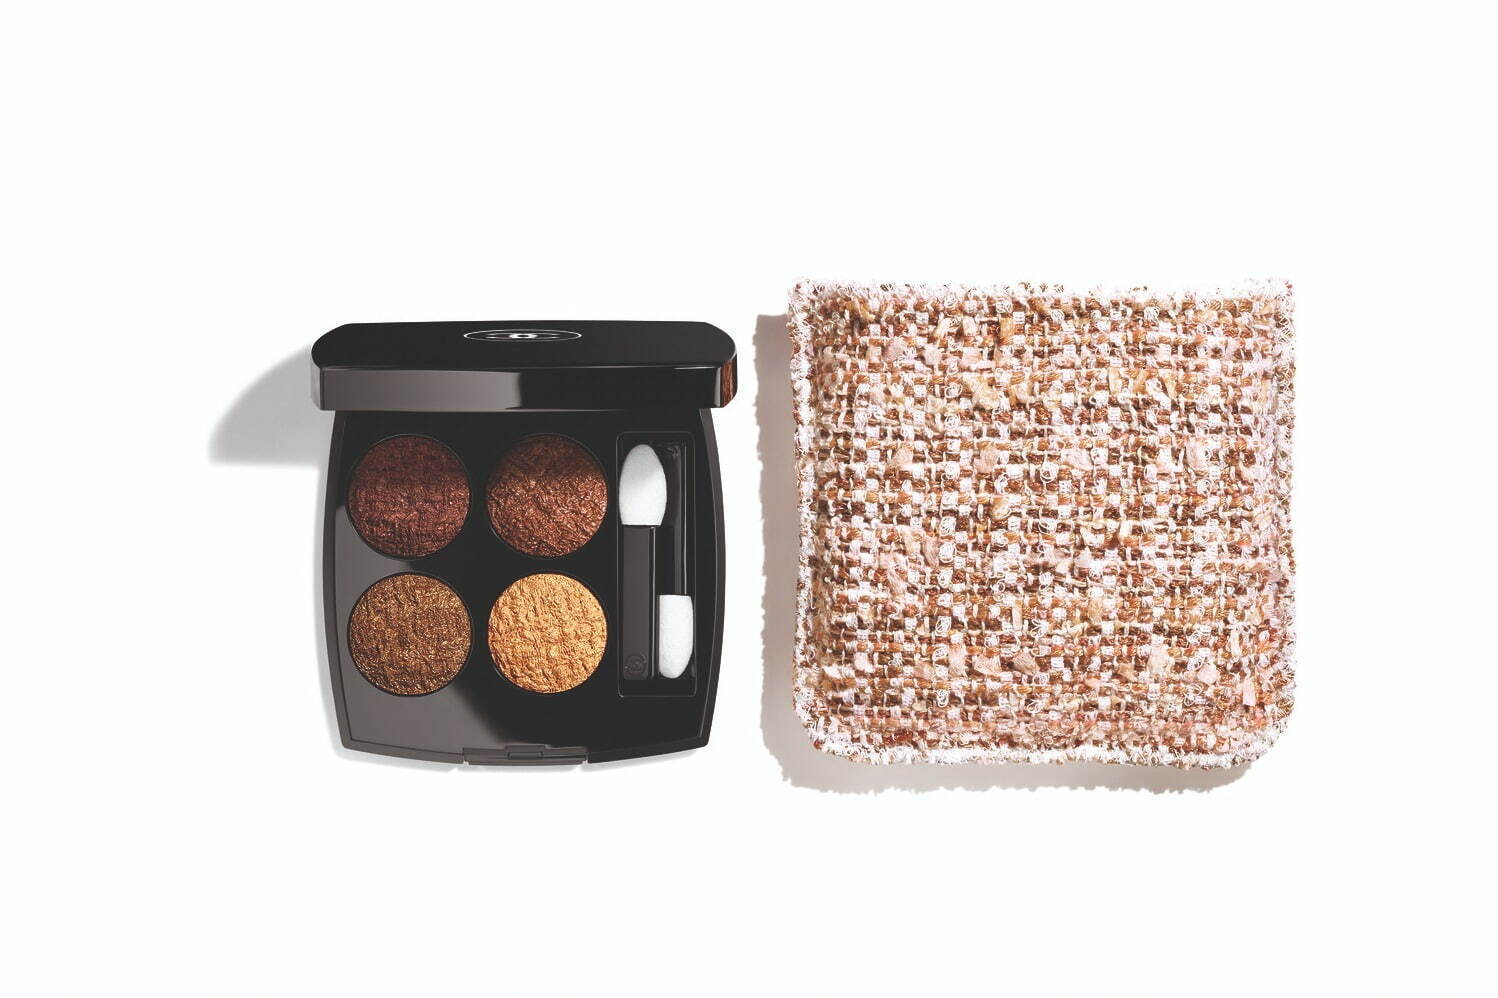 Transform your look with these neutral eye make-up palettes